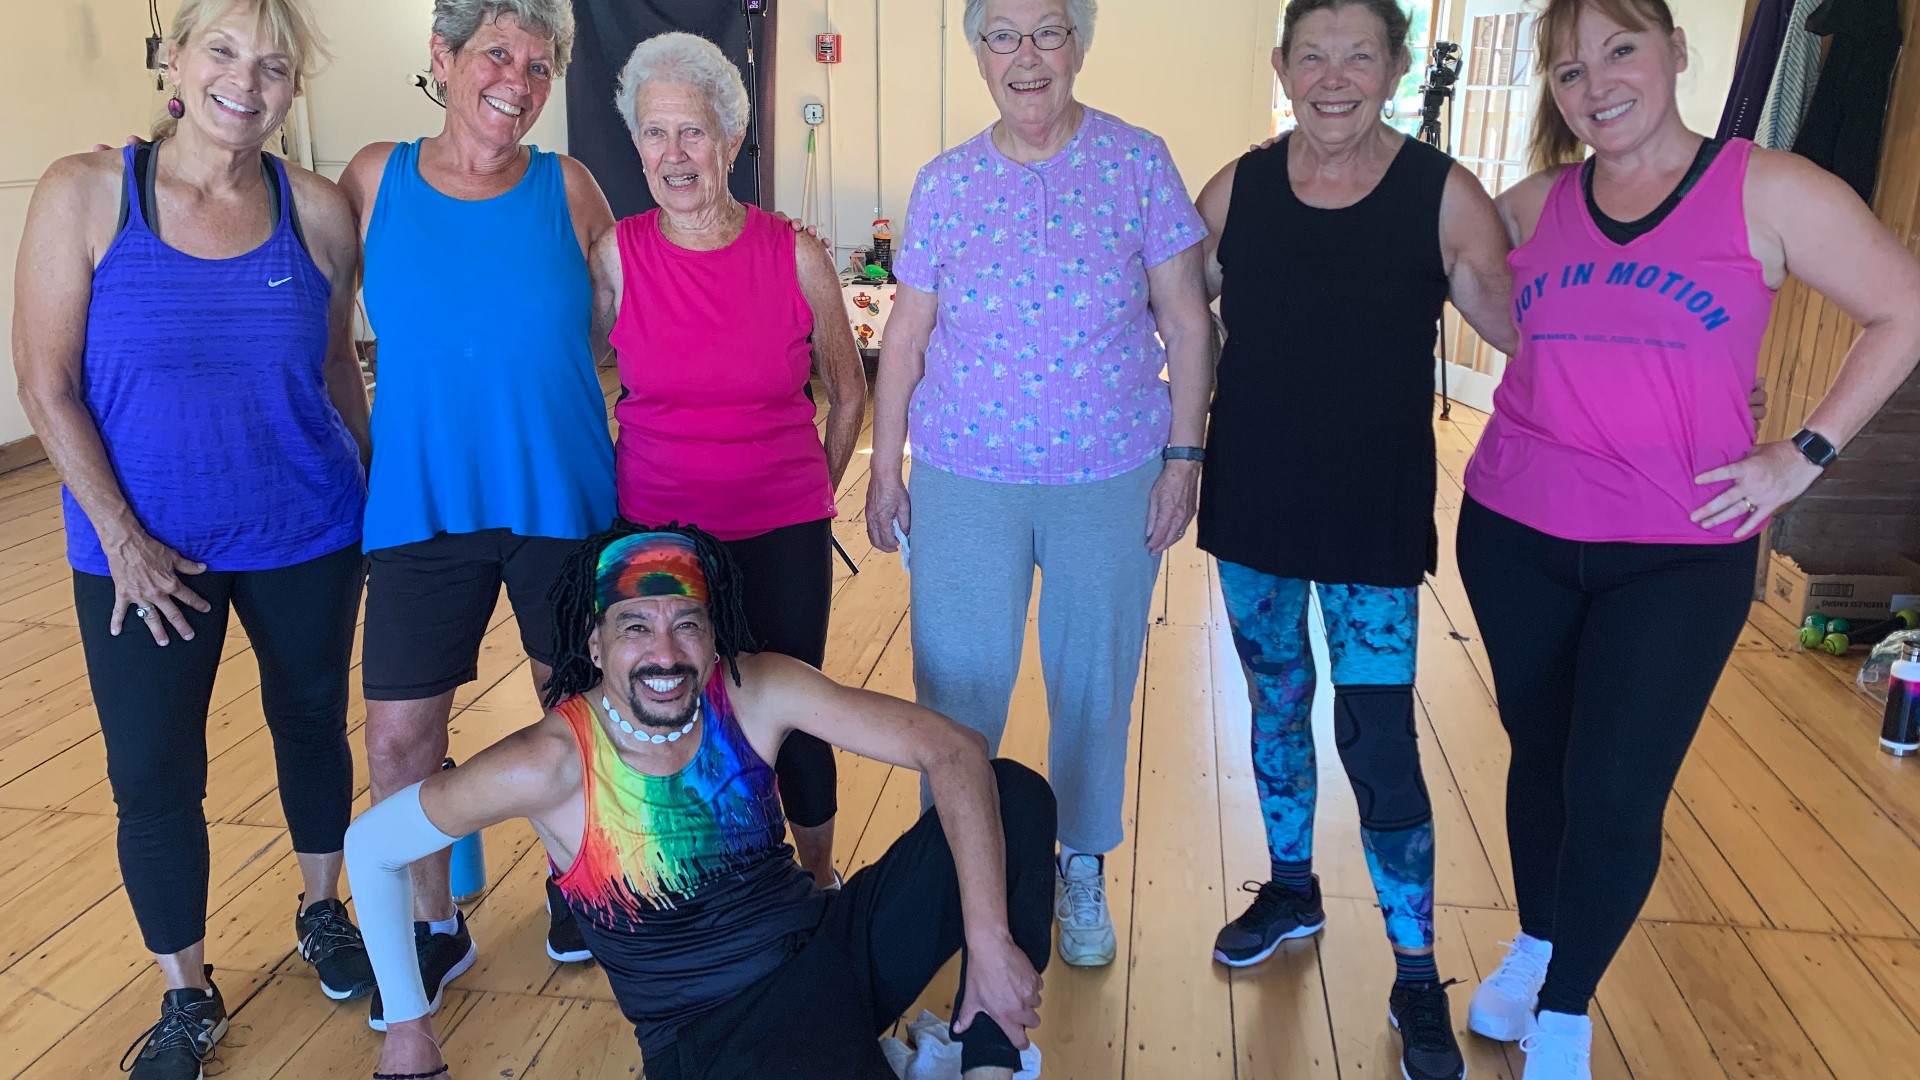 Antonio Garreton started by teaching Zumba classes and is now fondly known as "Tony Dancer," because he teaches all sorts of Latin music classes to Mainers.